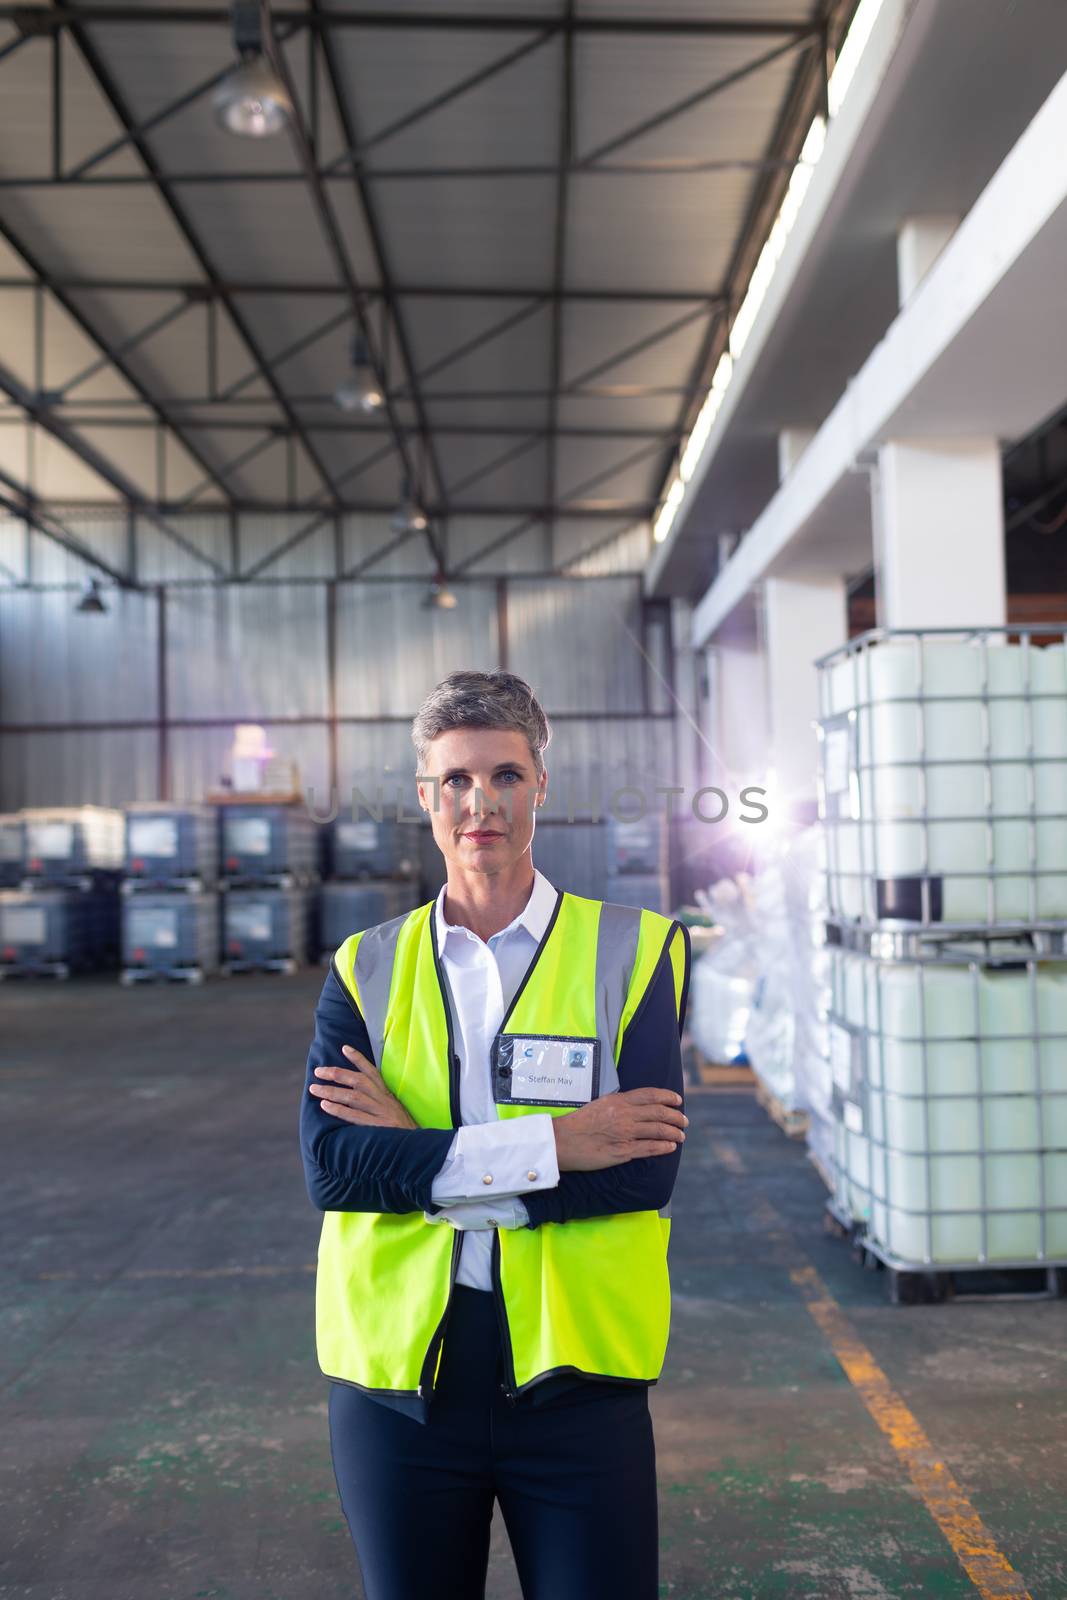 Mature female staff in reflective jacket standing with arms crossed in warehouse by Wavebreakmedia